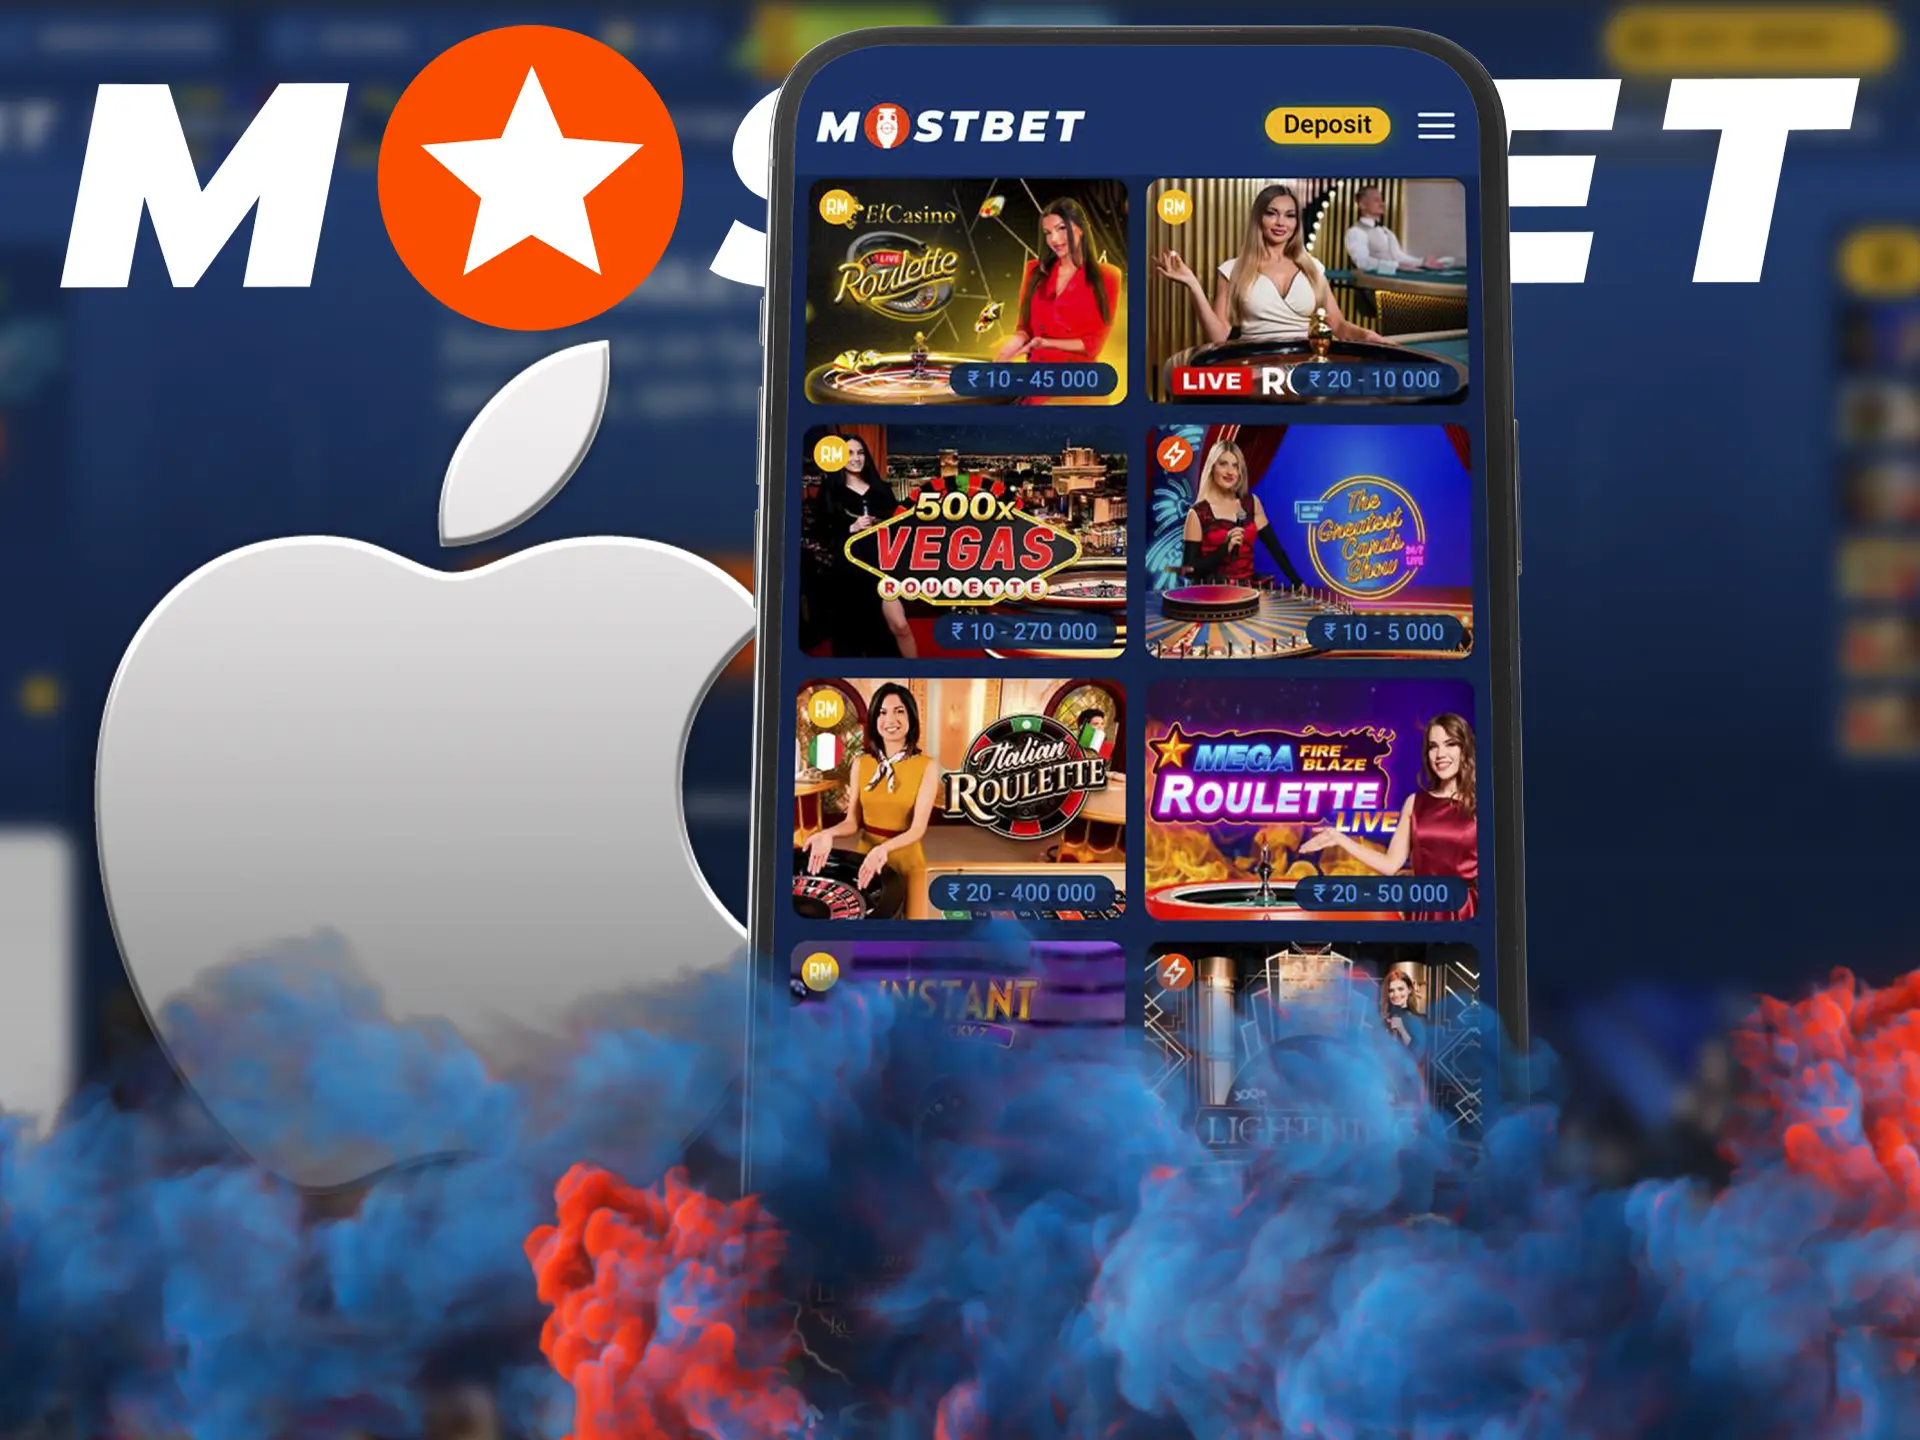 Roulette from Mostbet is available in the app on all iOS devices.